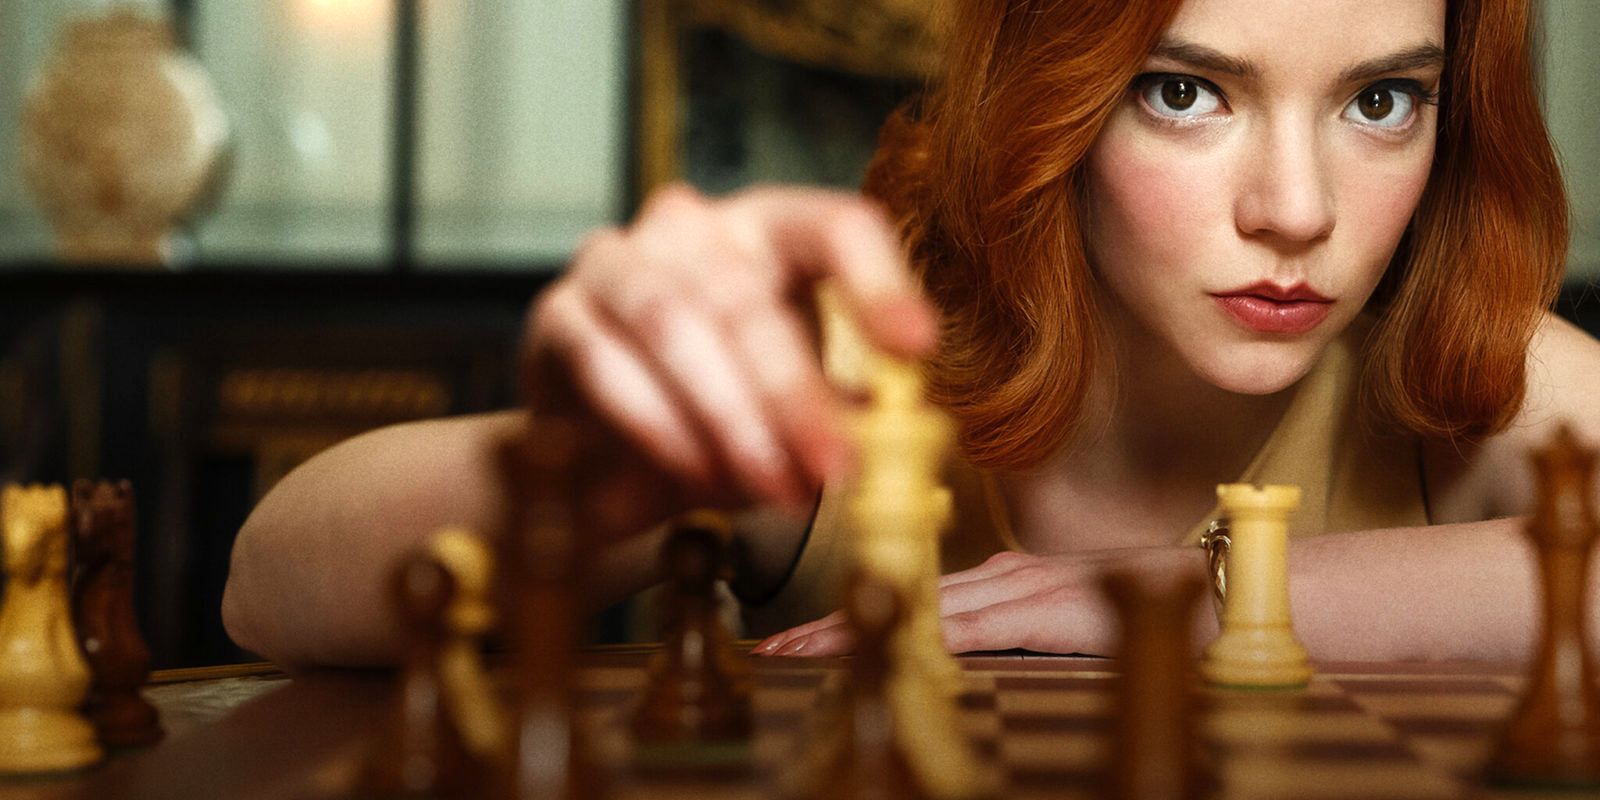 Beth making a chess move in Queen's Gambit.